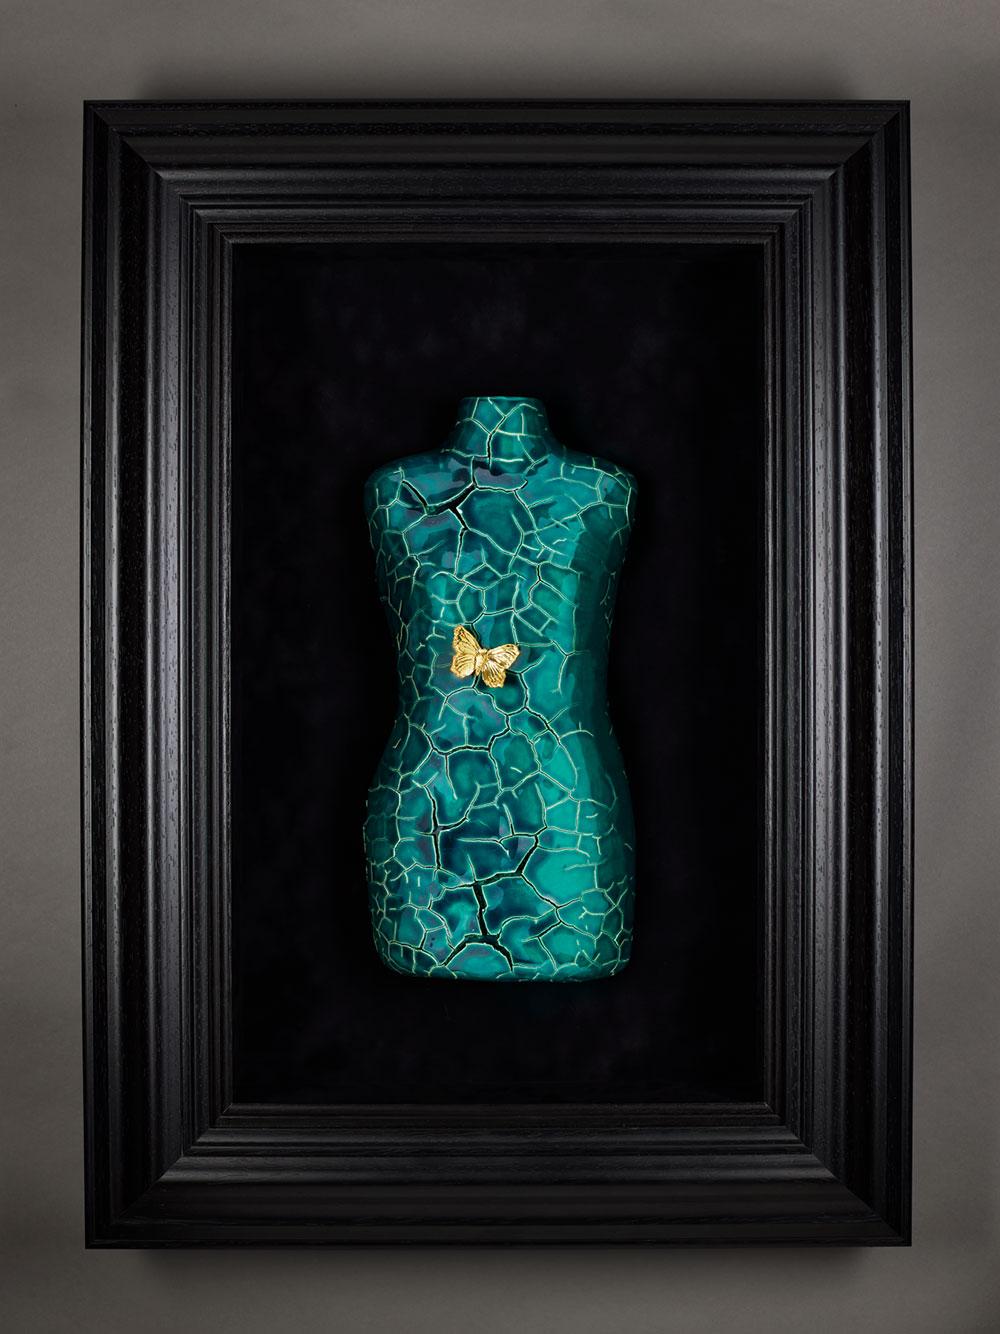 Azure I - Wall Sculpture, Ceramic, handcrafted, unique, fashion, enviromental - Contemporary Mixed Media Art by Oliver Tanay